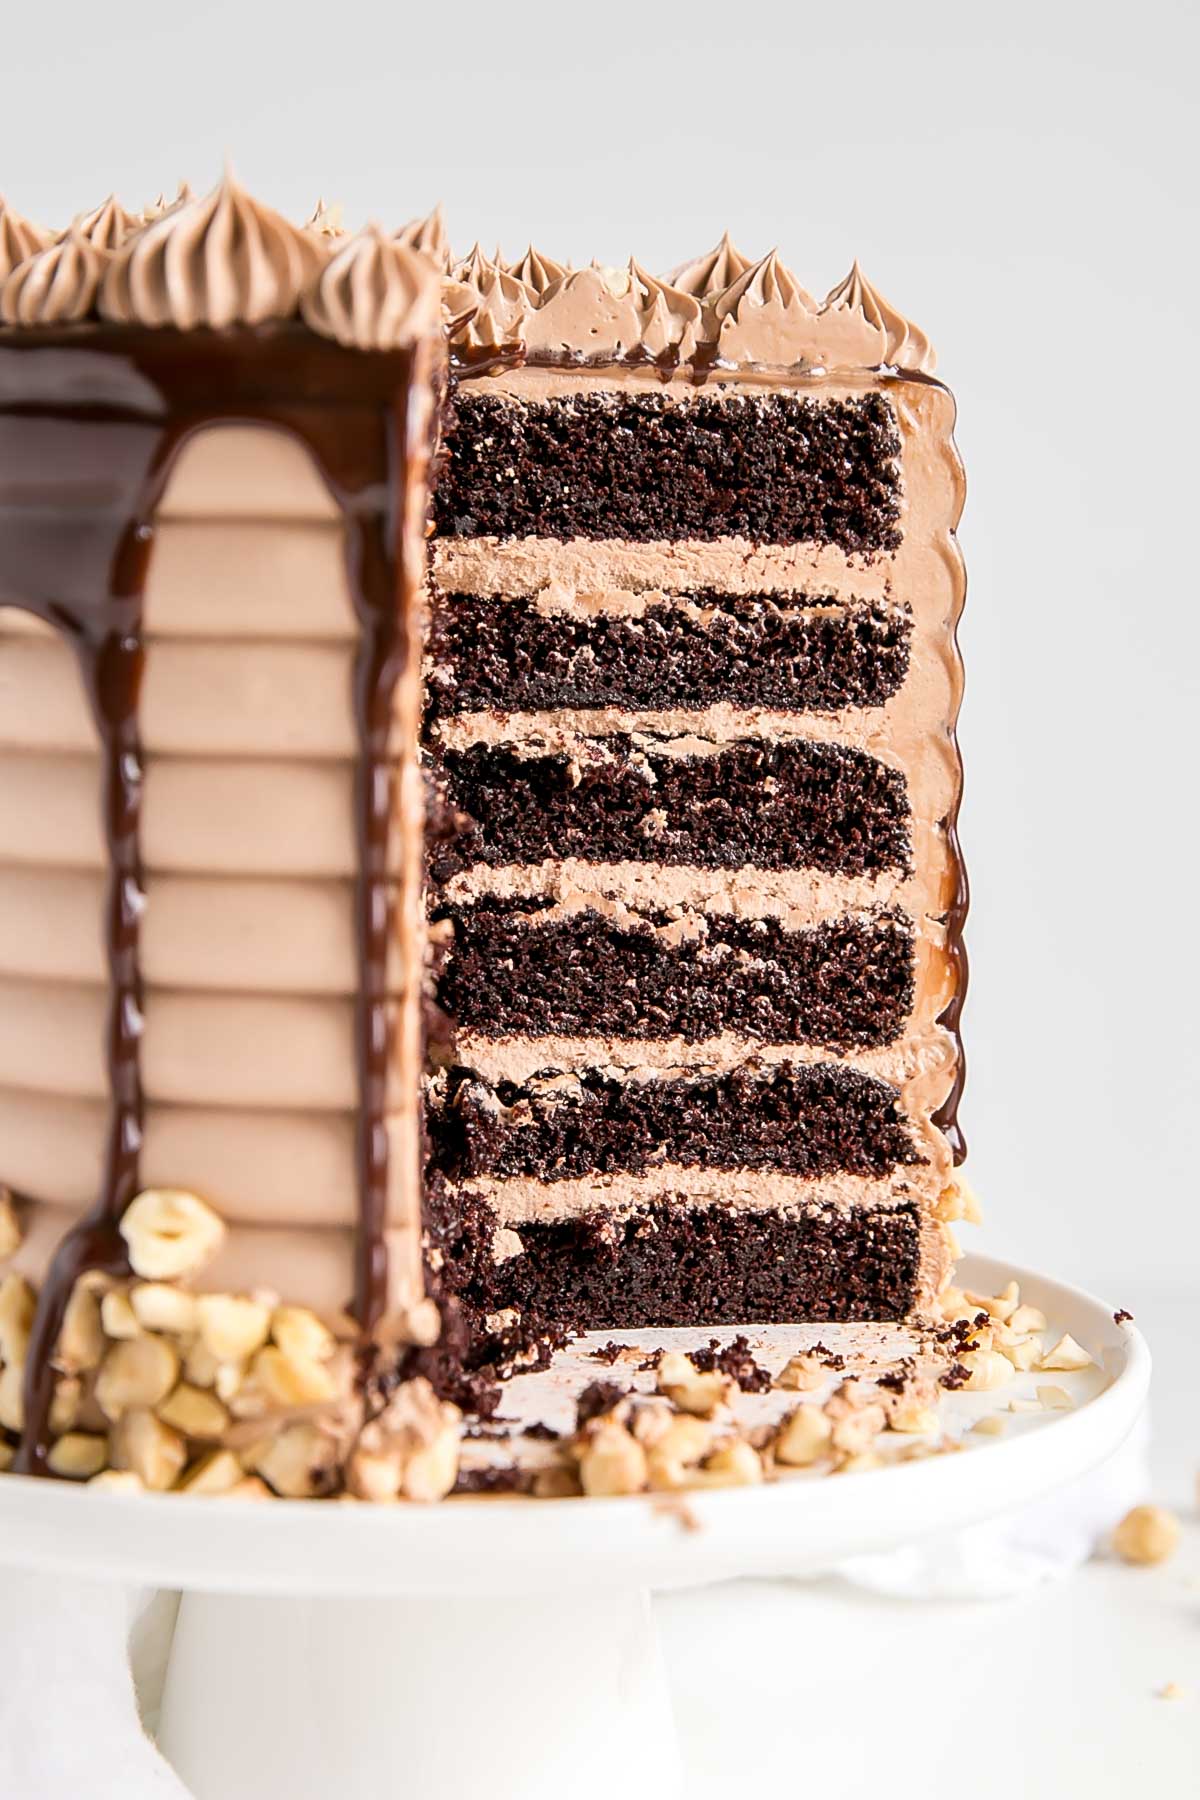 Six layers of chocolate cake sandwiched with Nutella buttercream.